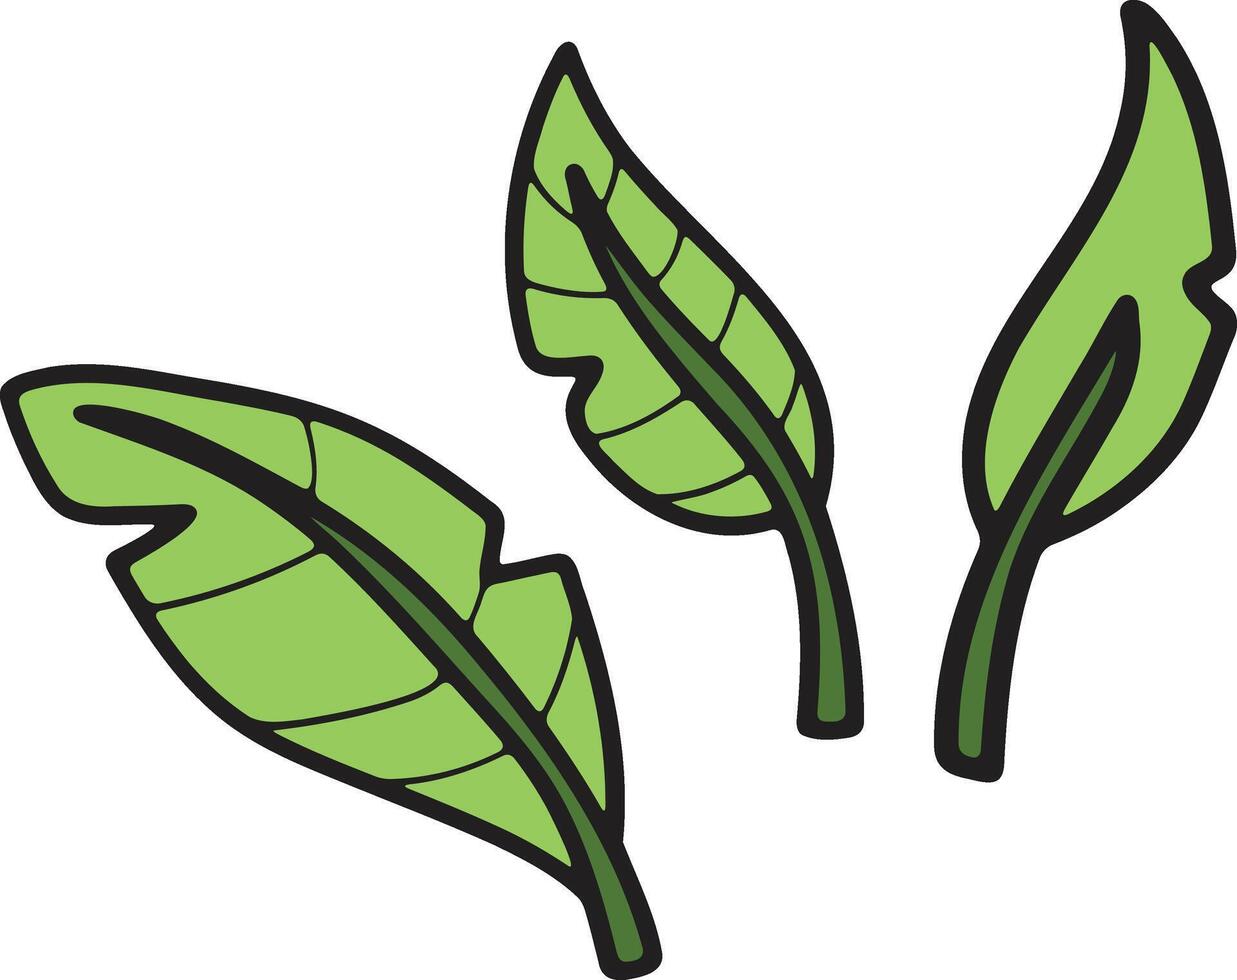 A leafy plant with a black outline vector